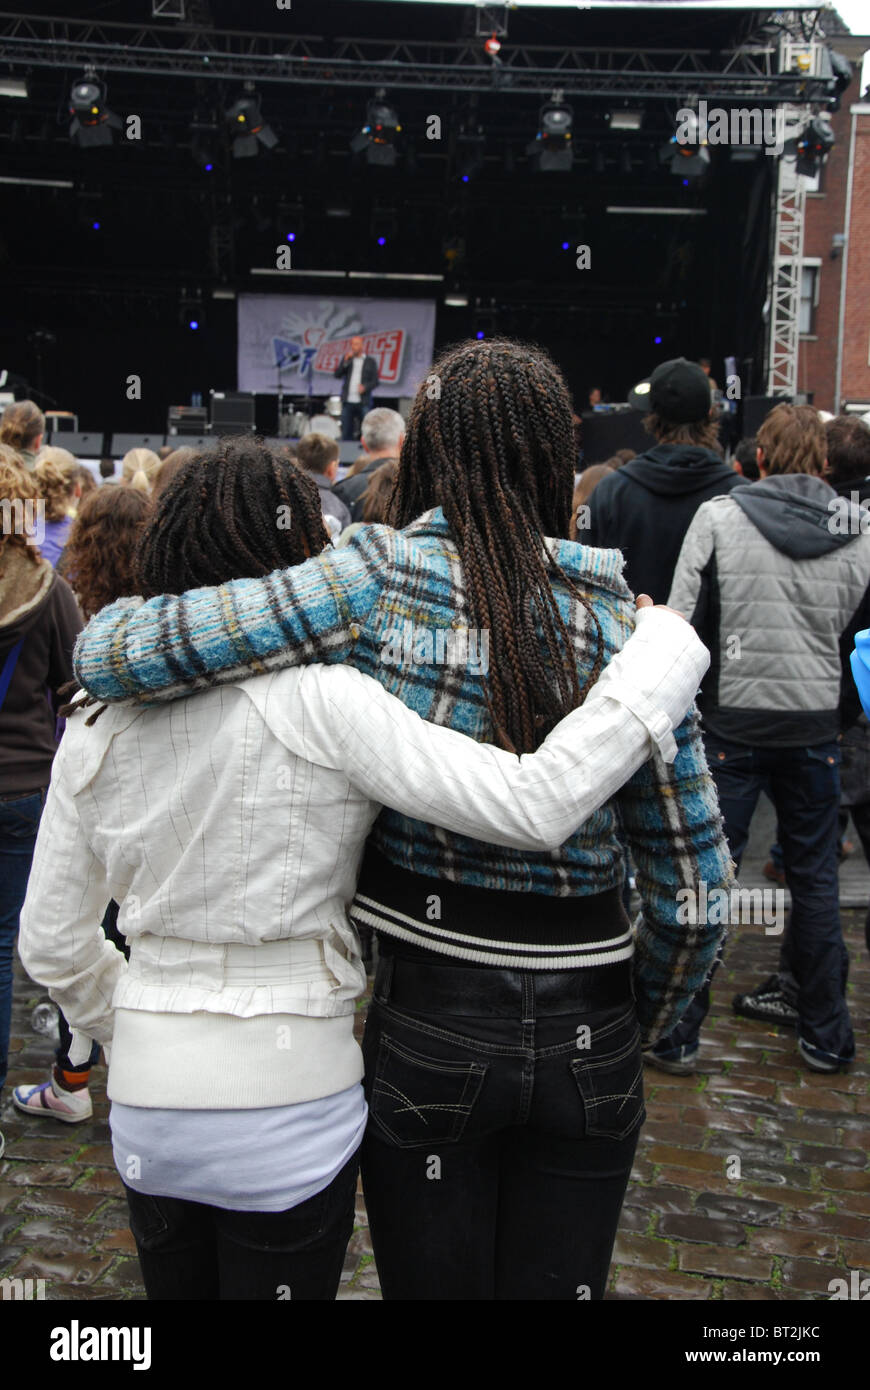 rasta couple in the crowd at rock concert Stock Photo